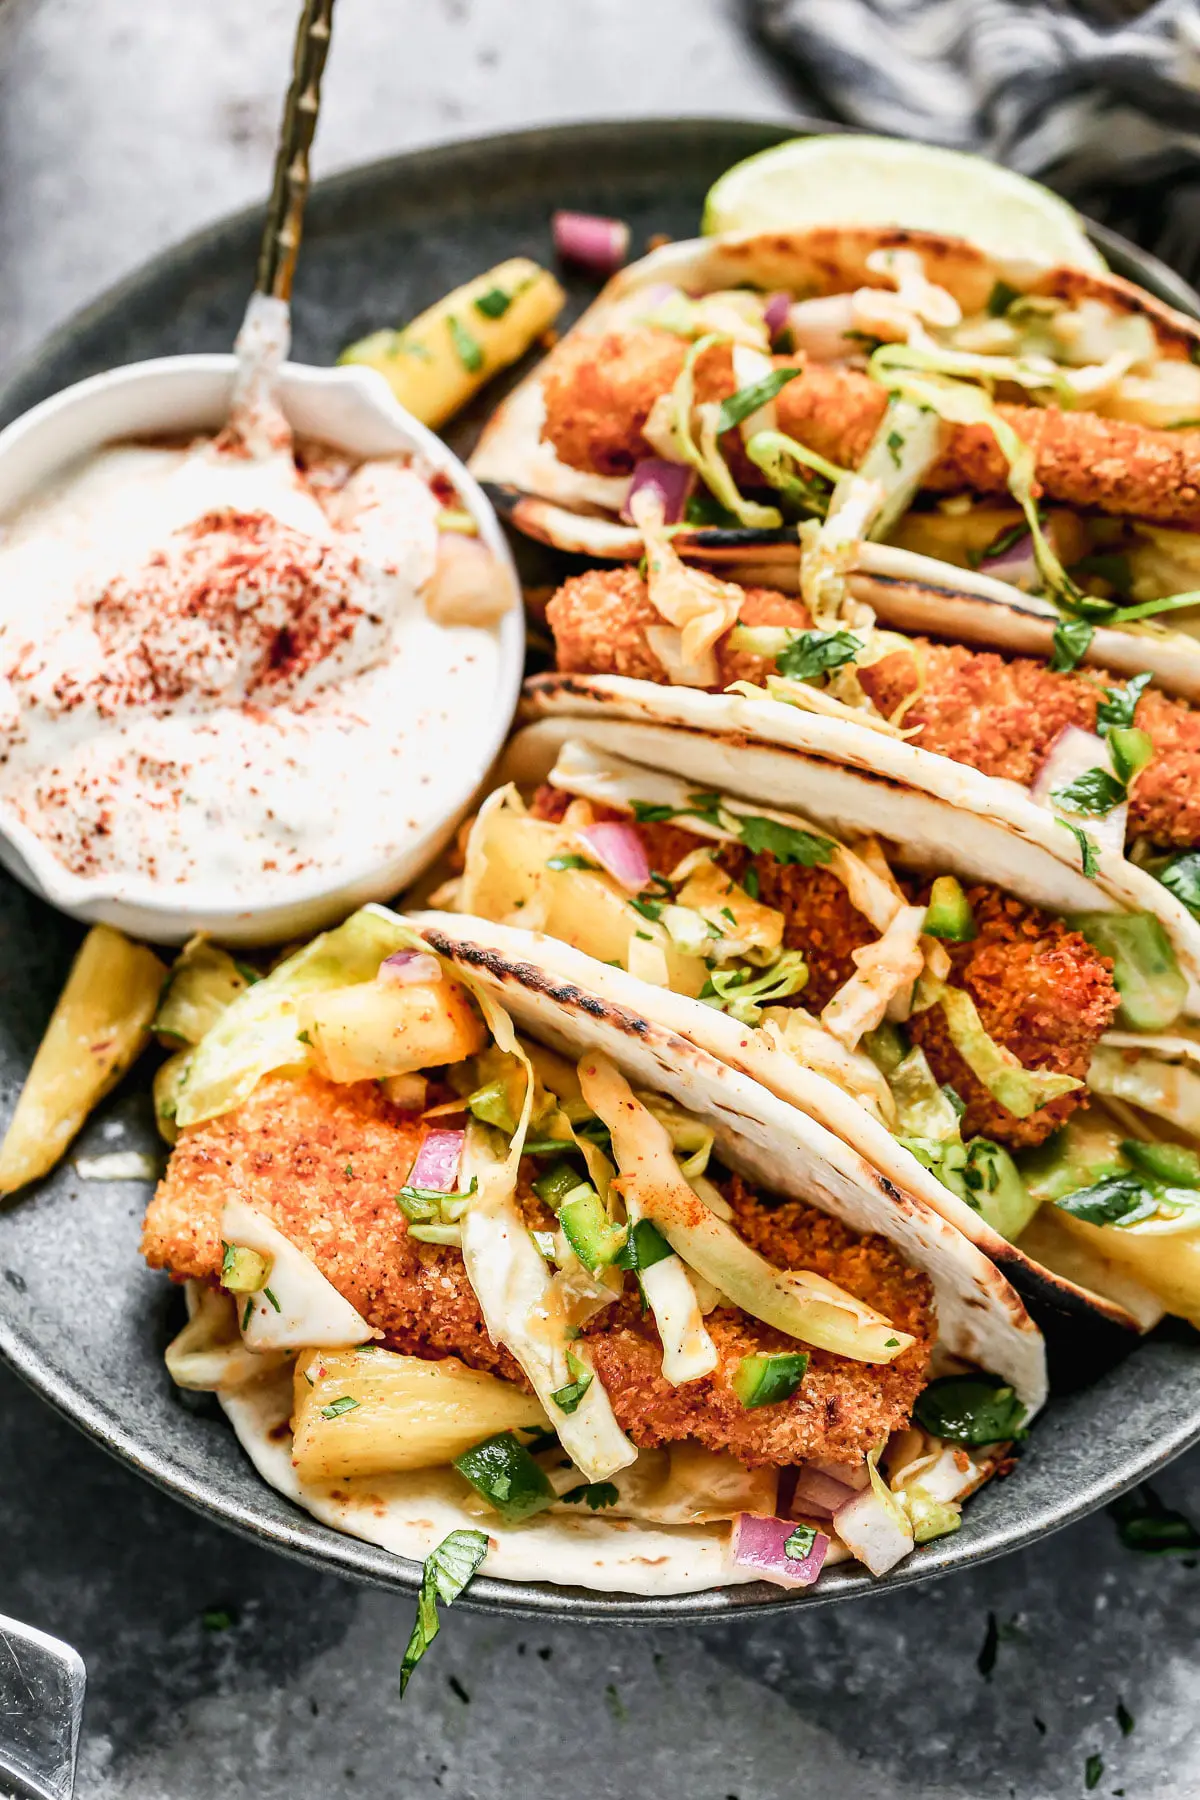 Never have a soggy fish taco again! Our Air Fryer Fish Tacos produce the CRISPIEST breaded fish without all the fat and calories and WITH all the flavor. We nestle the crunchy barramundi in charred street taco tortillas, top with a quick pineapple slaw, and a fresh squeeze of lime juice. 